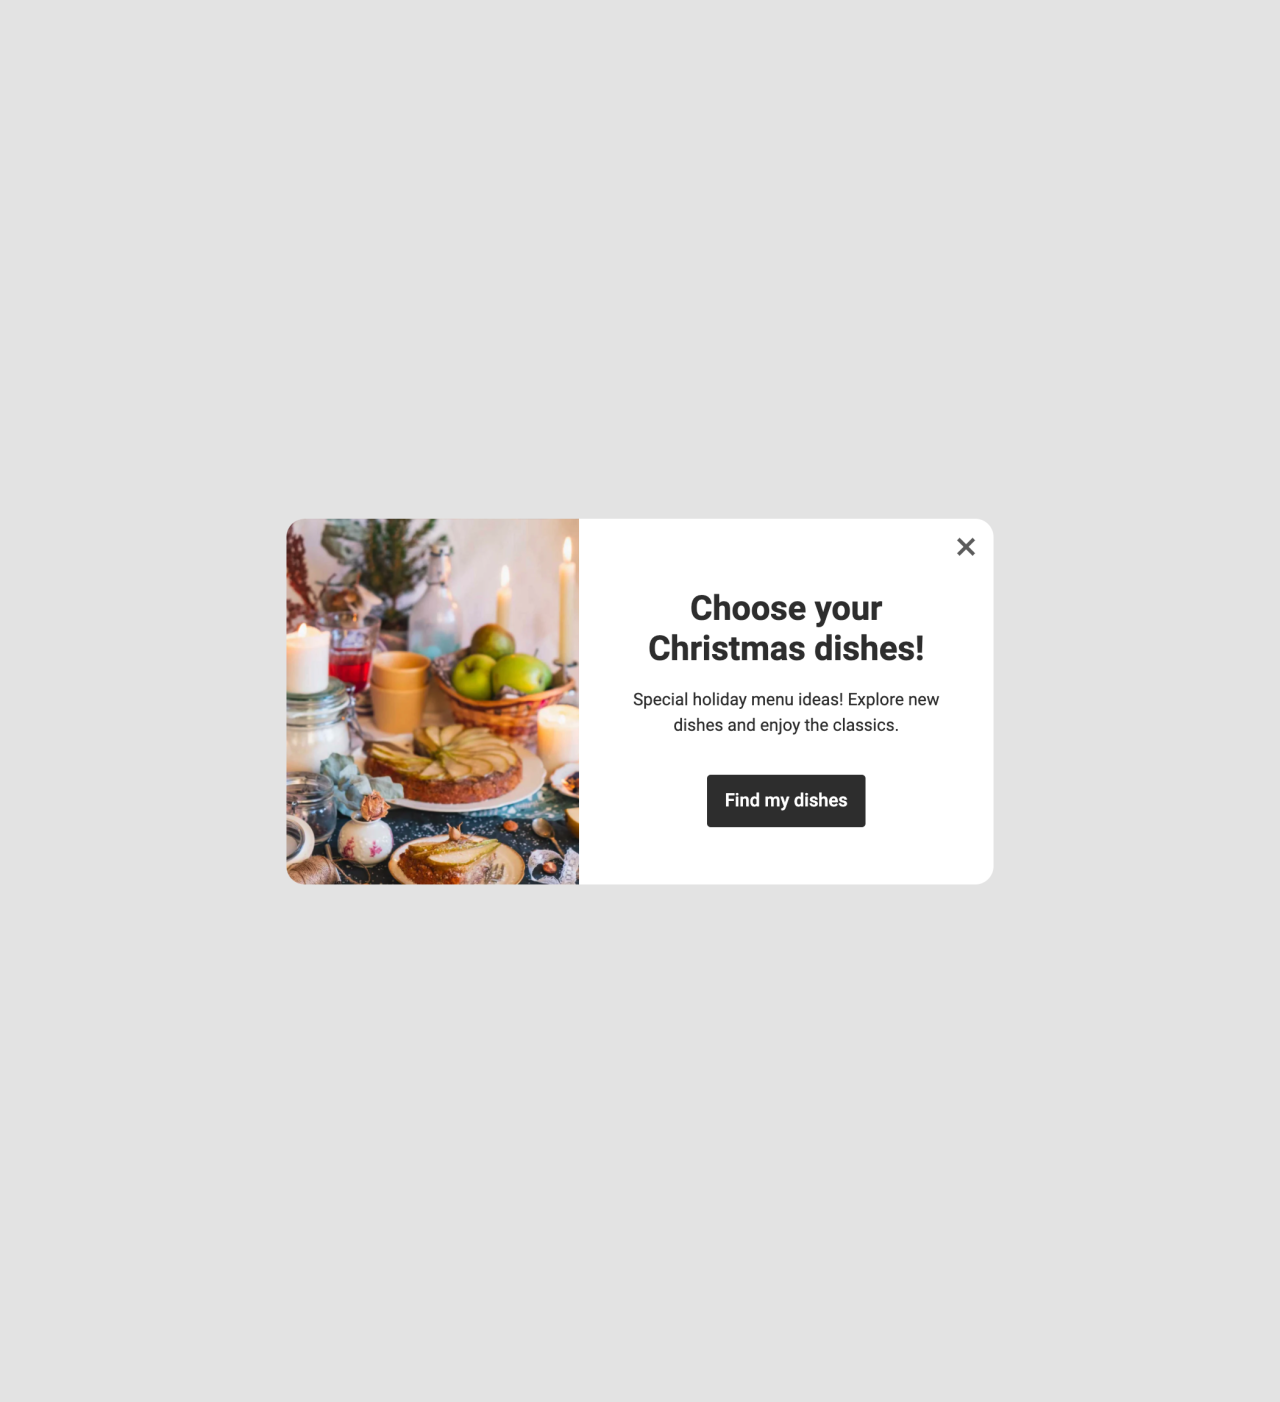 Holiday recipe ideas template - Made by MailerLite